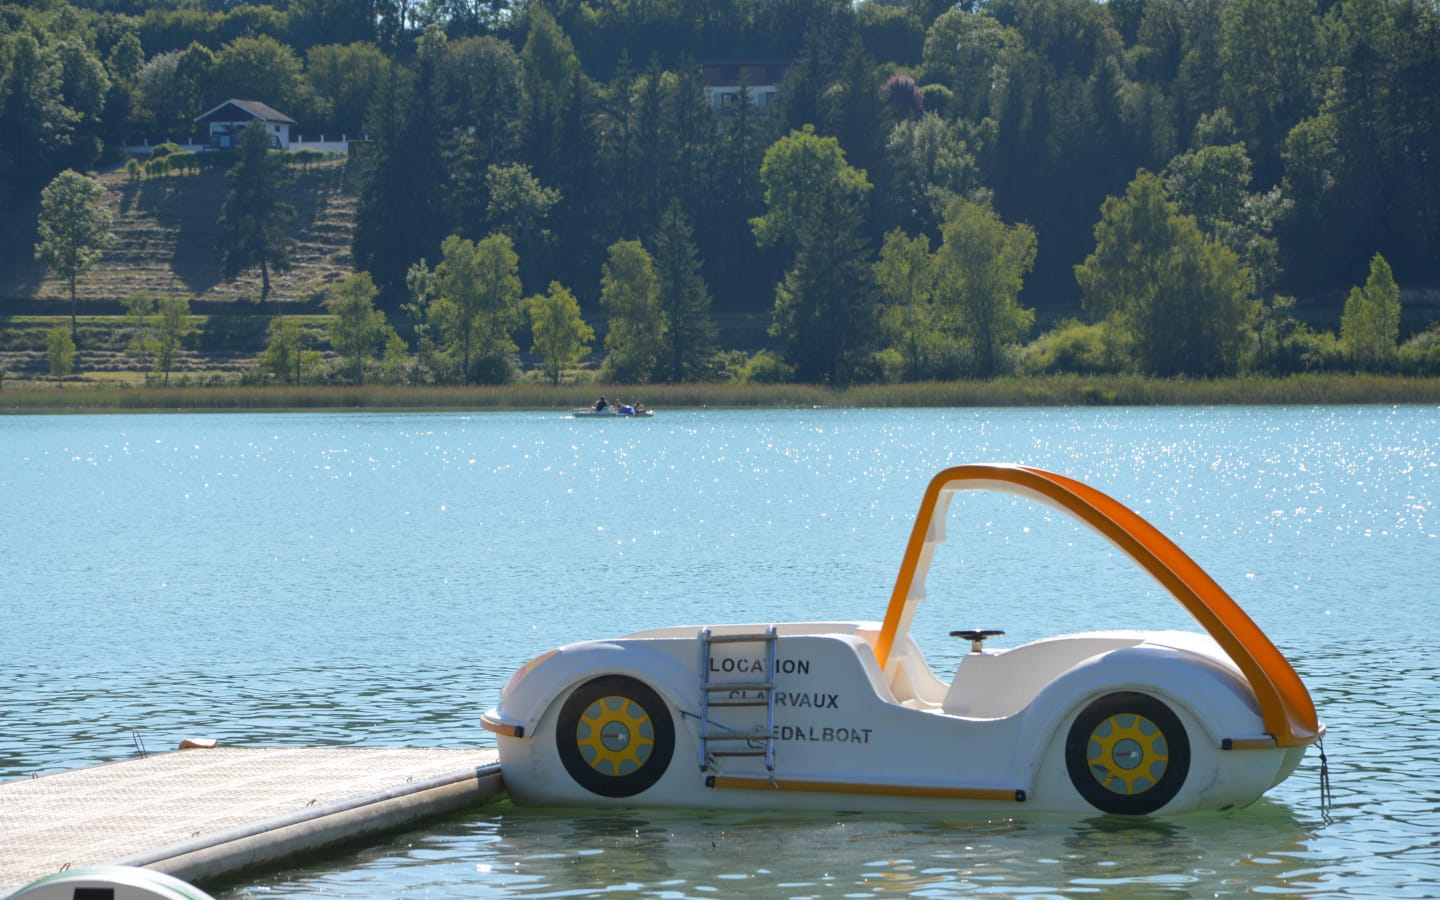 Clairvaux pedal boat 